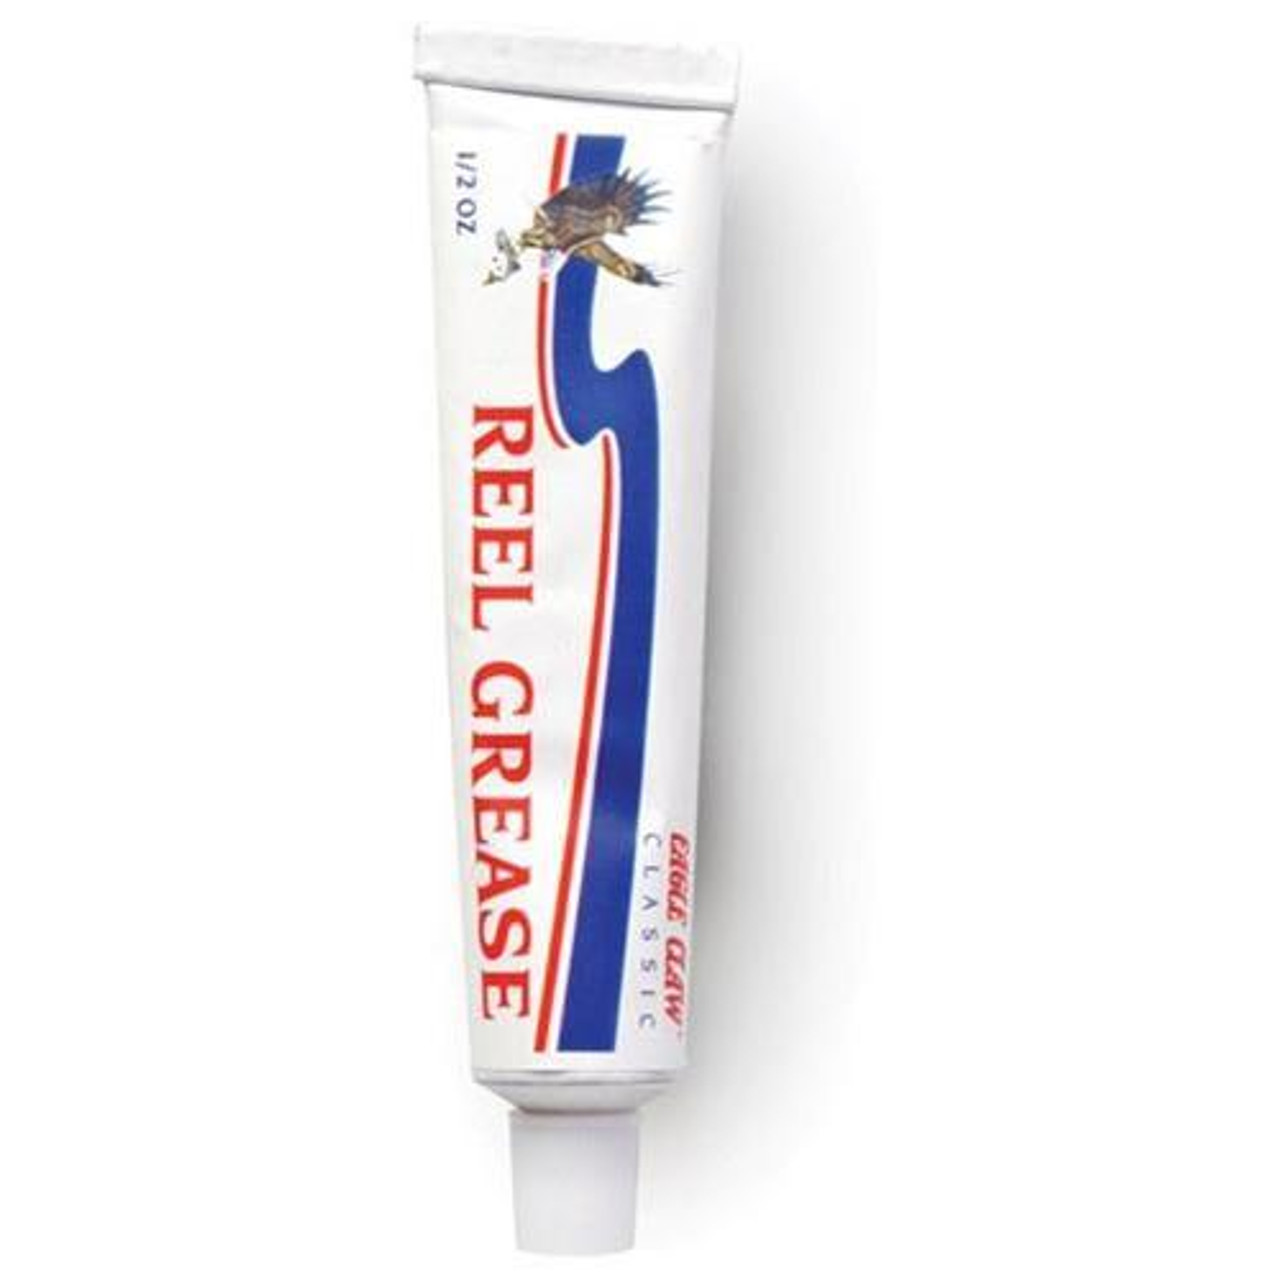 Eagle Claw REELG Reel Grease, 1/2-Ounce  